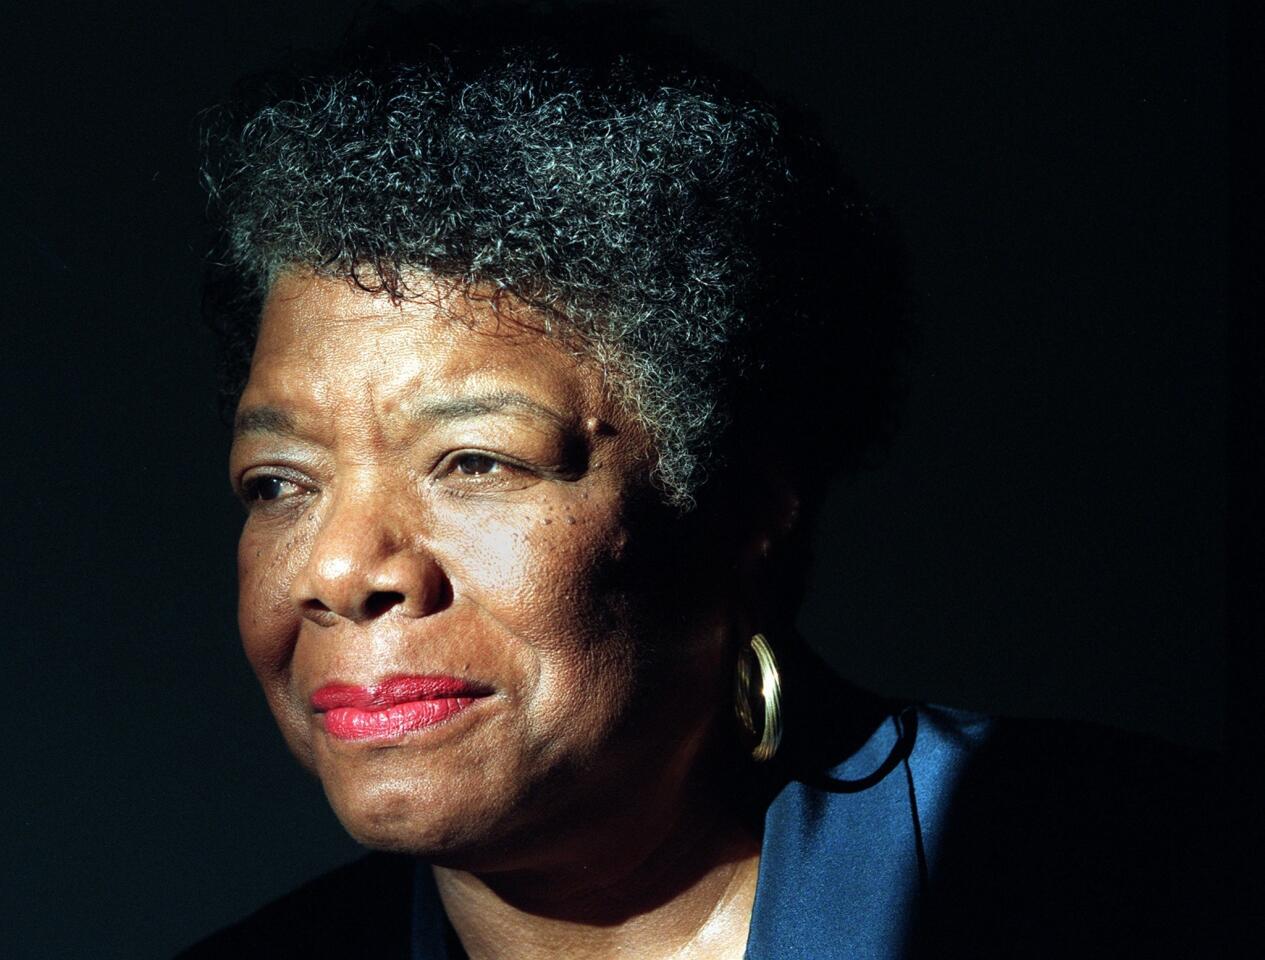 Maya Angelou -- poet, educator, historian, author, playwright, activist, director and more -- had an exceptional entertainment presence among her many accomplishments.